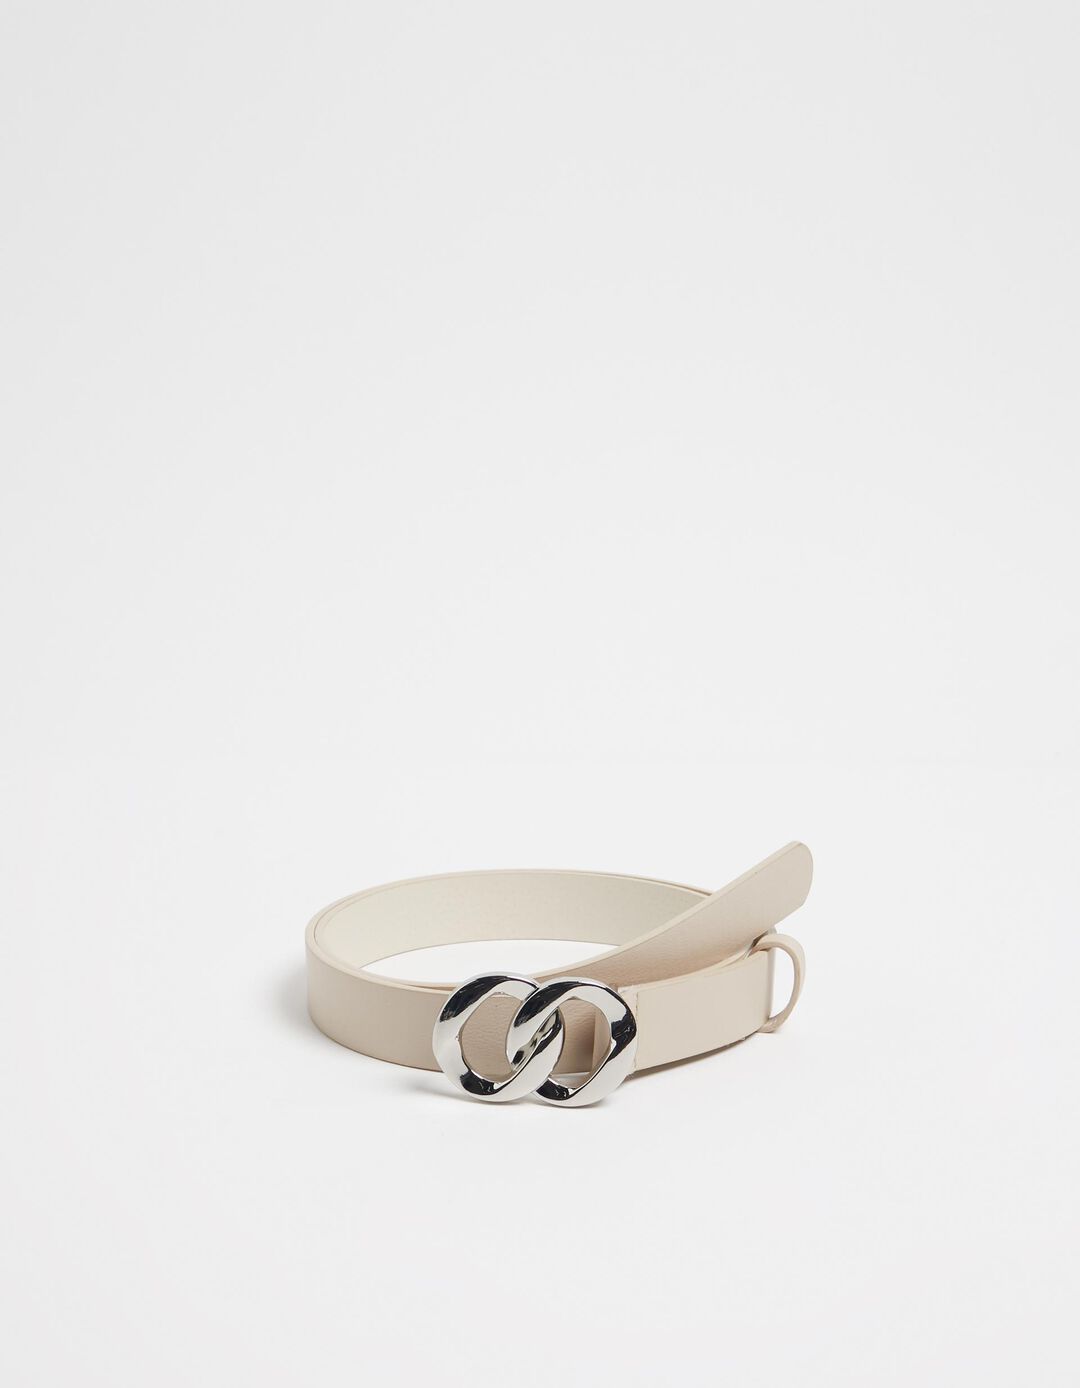 Special Buckle Belt, Woman, White